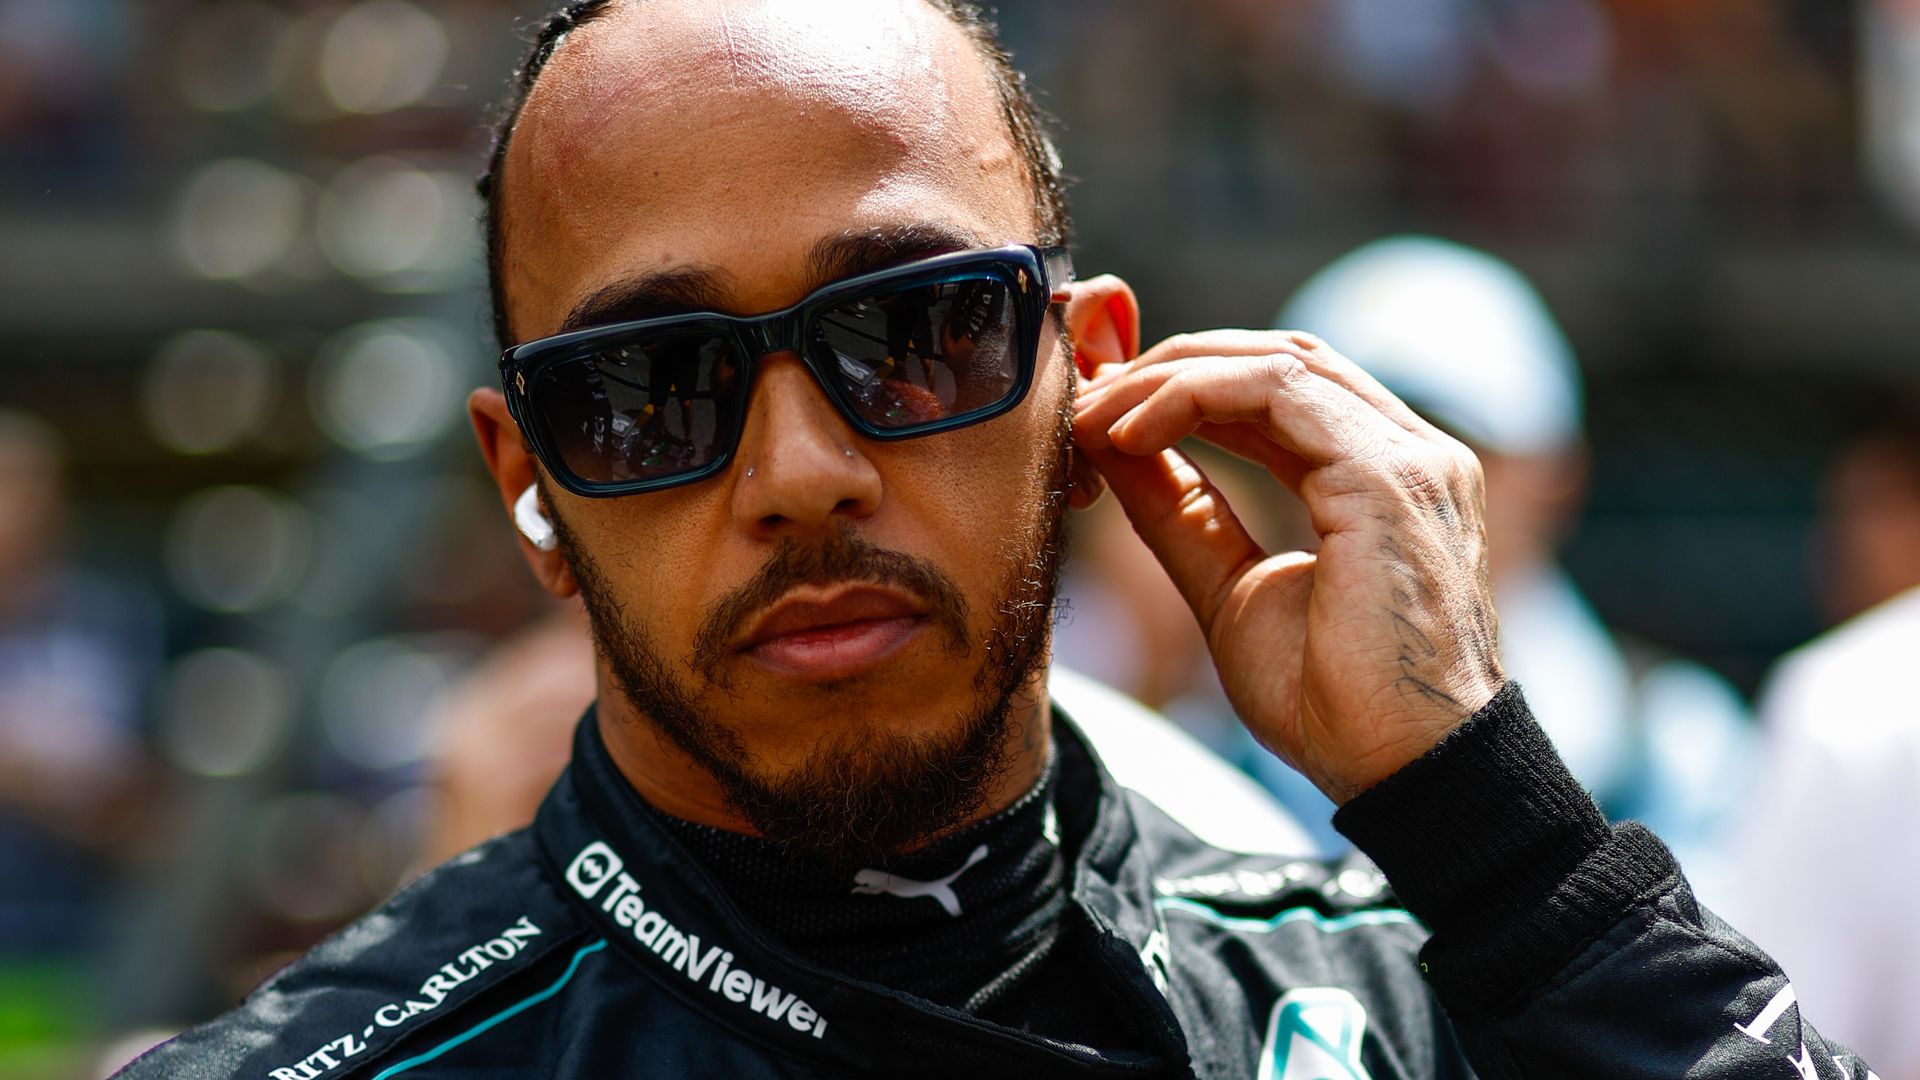 Can Hamilton recover at Silverstone from 'shocking' performance?